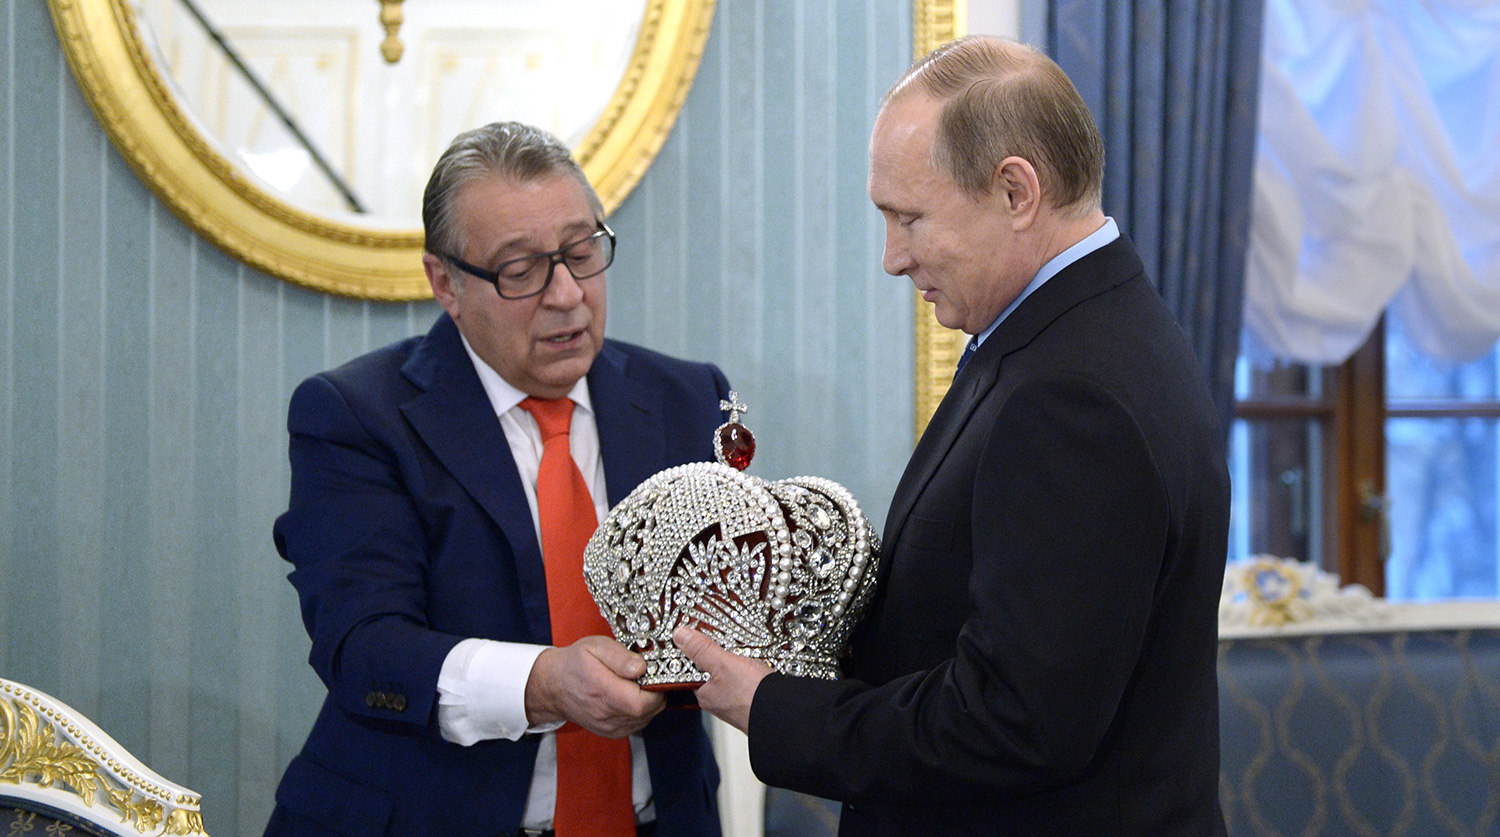 Gennady Khazanov, an acclaimed Russian comedic actor loyal to the Putin regime, presenting the Russian president with a reproduction of the Russian imperial crown made for Putin's 63rd birthday. (Image: meduza.io)